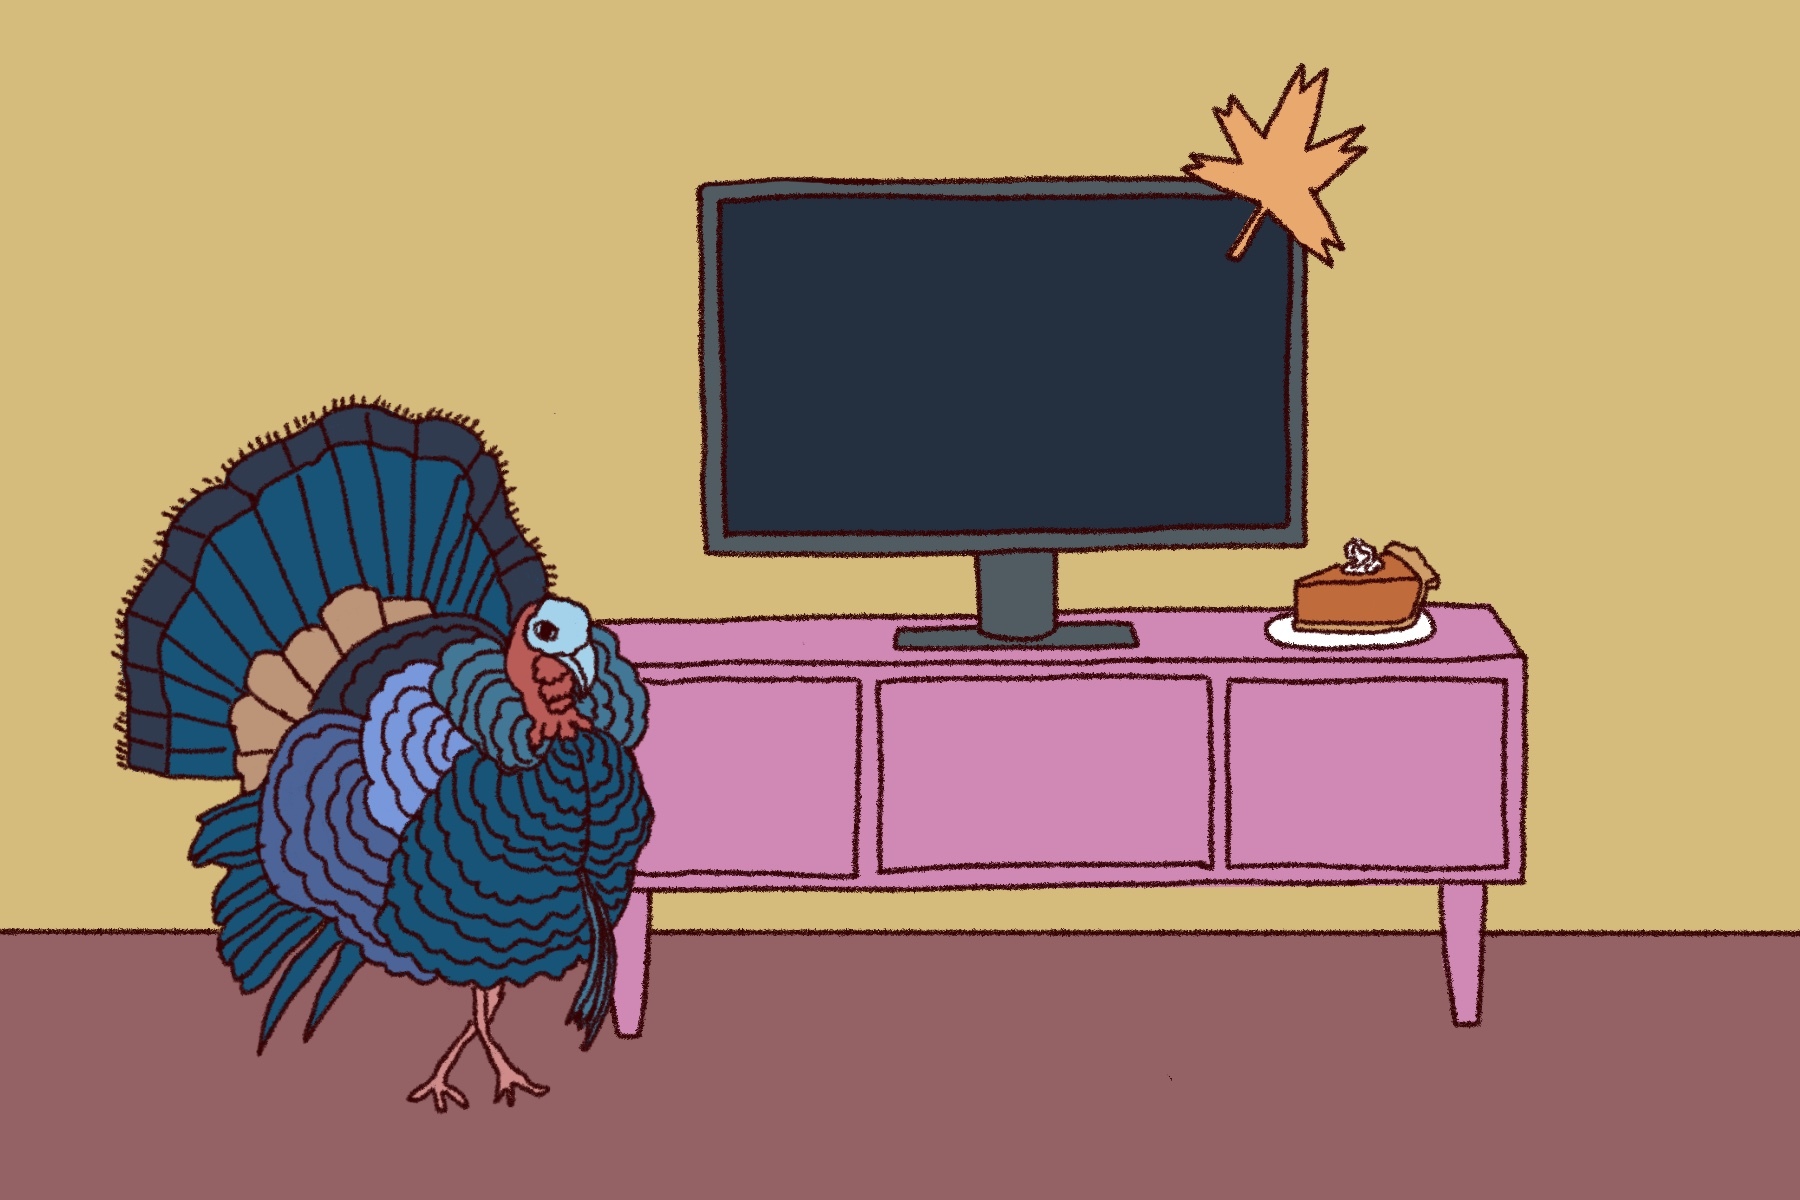 In an article about Thanksgiving specials, a picture of a turkey next to a television.